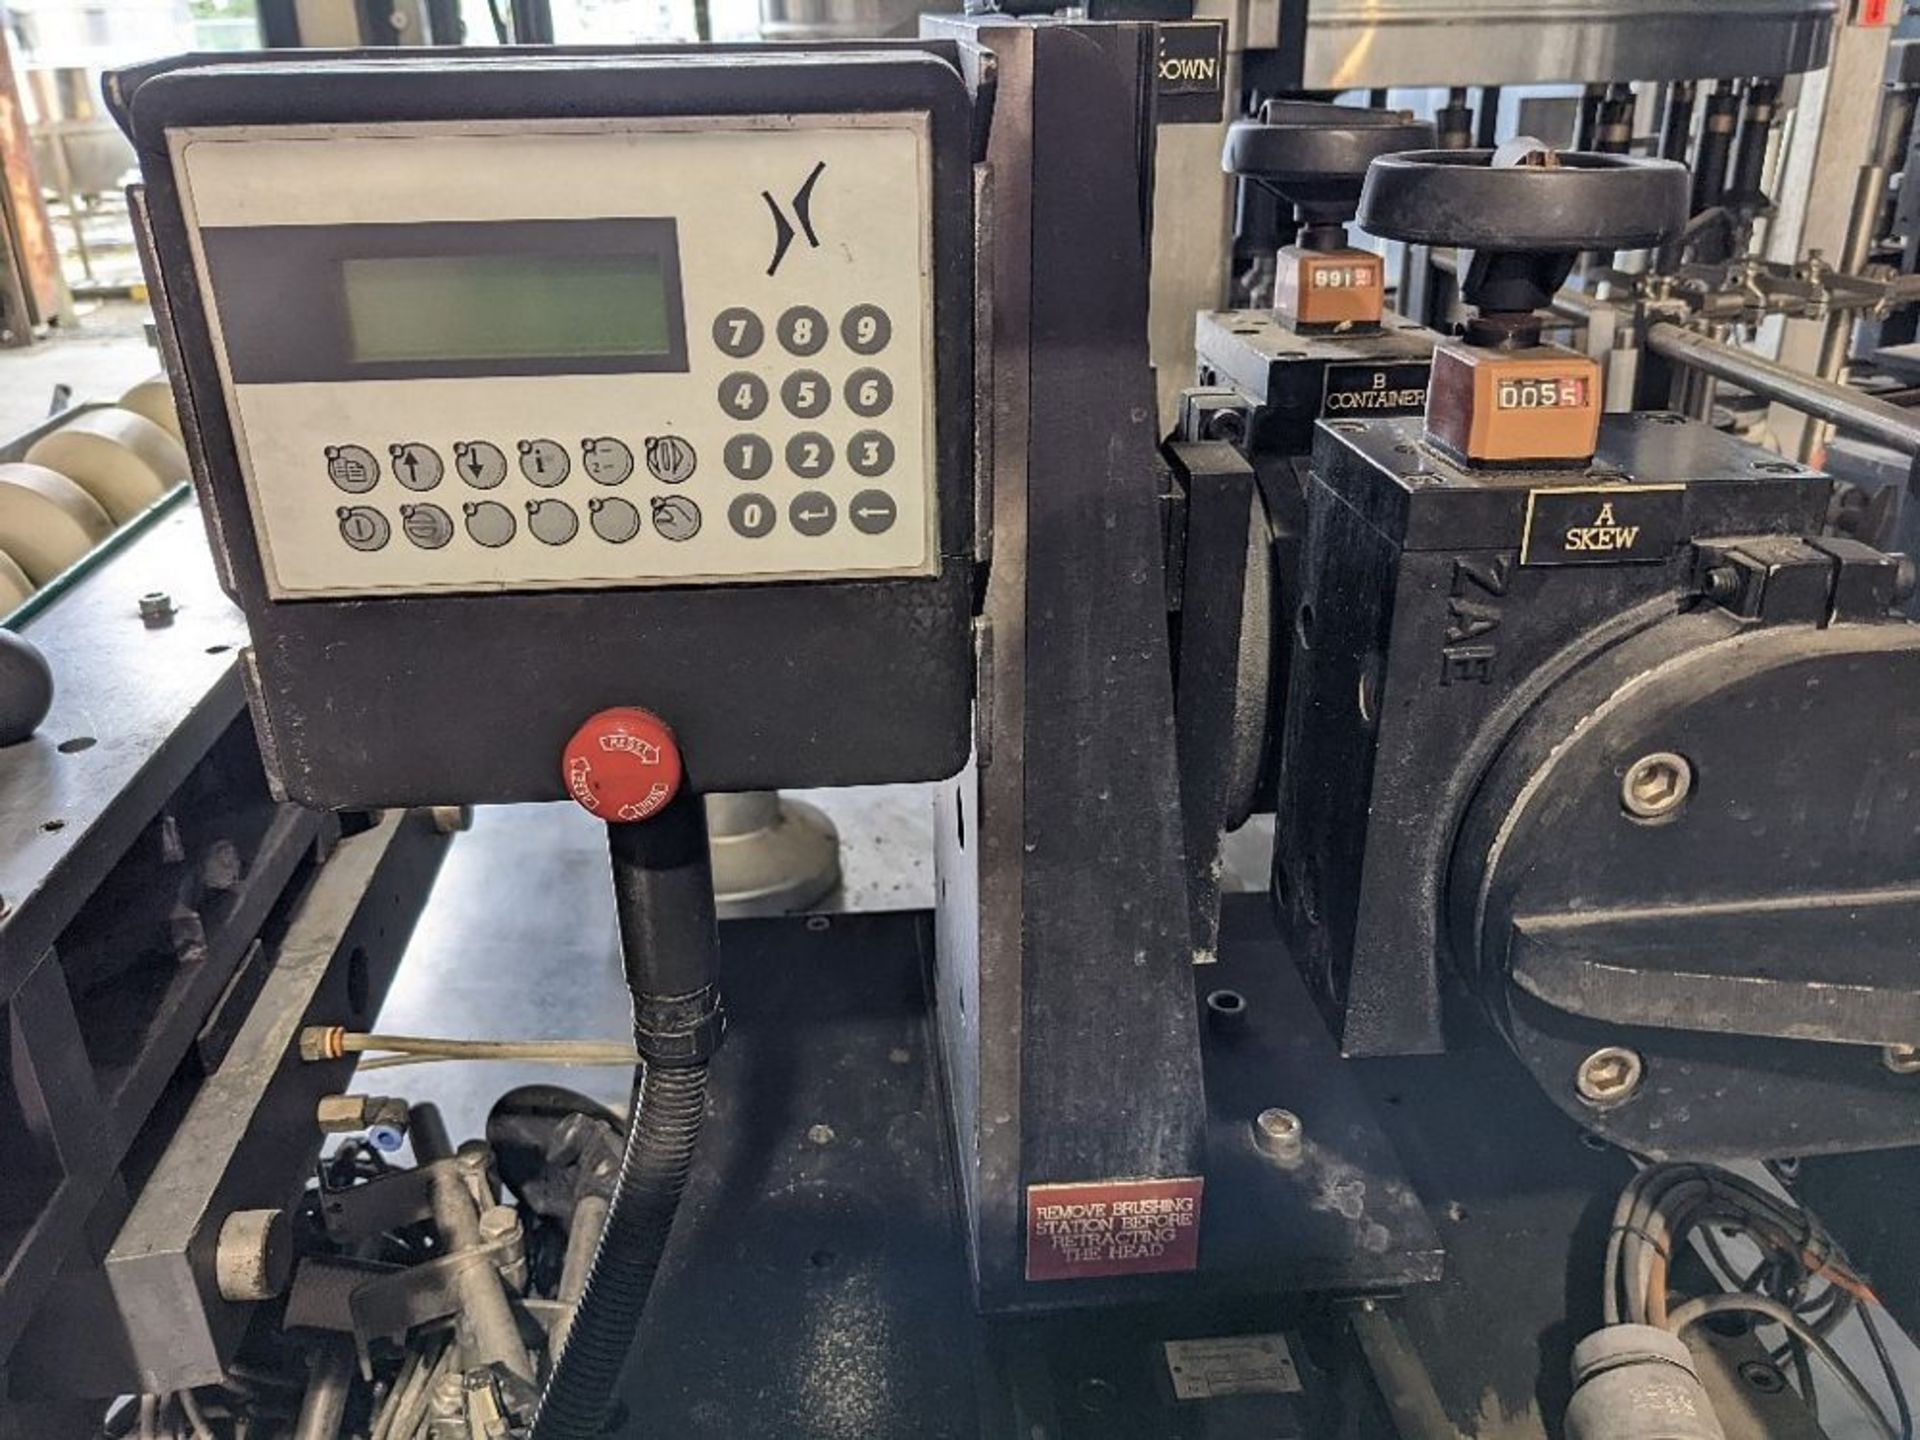 Krones Autocol 20 head Rotary Pressure Sensitive Labeler - Max label height is 8' - Vertical dual - Image 23 of 29